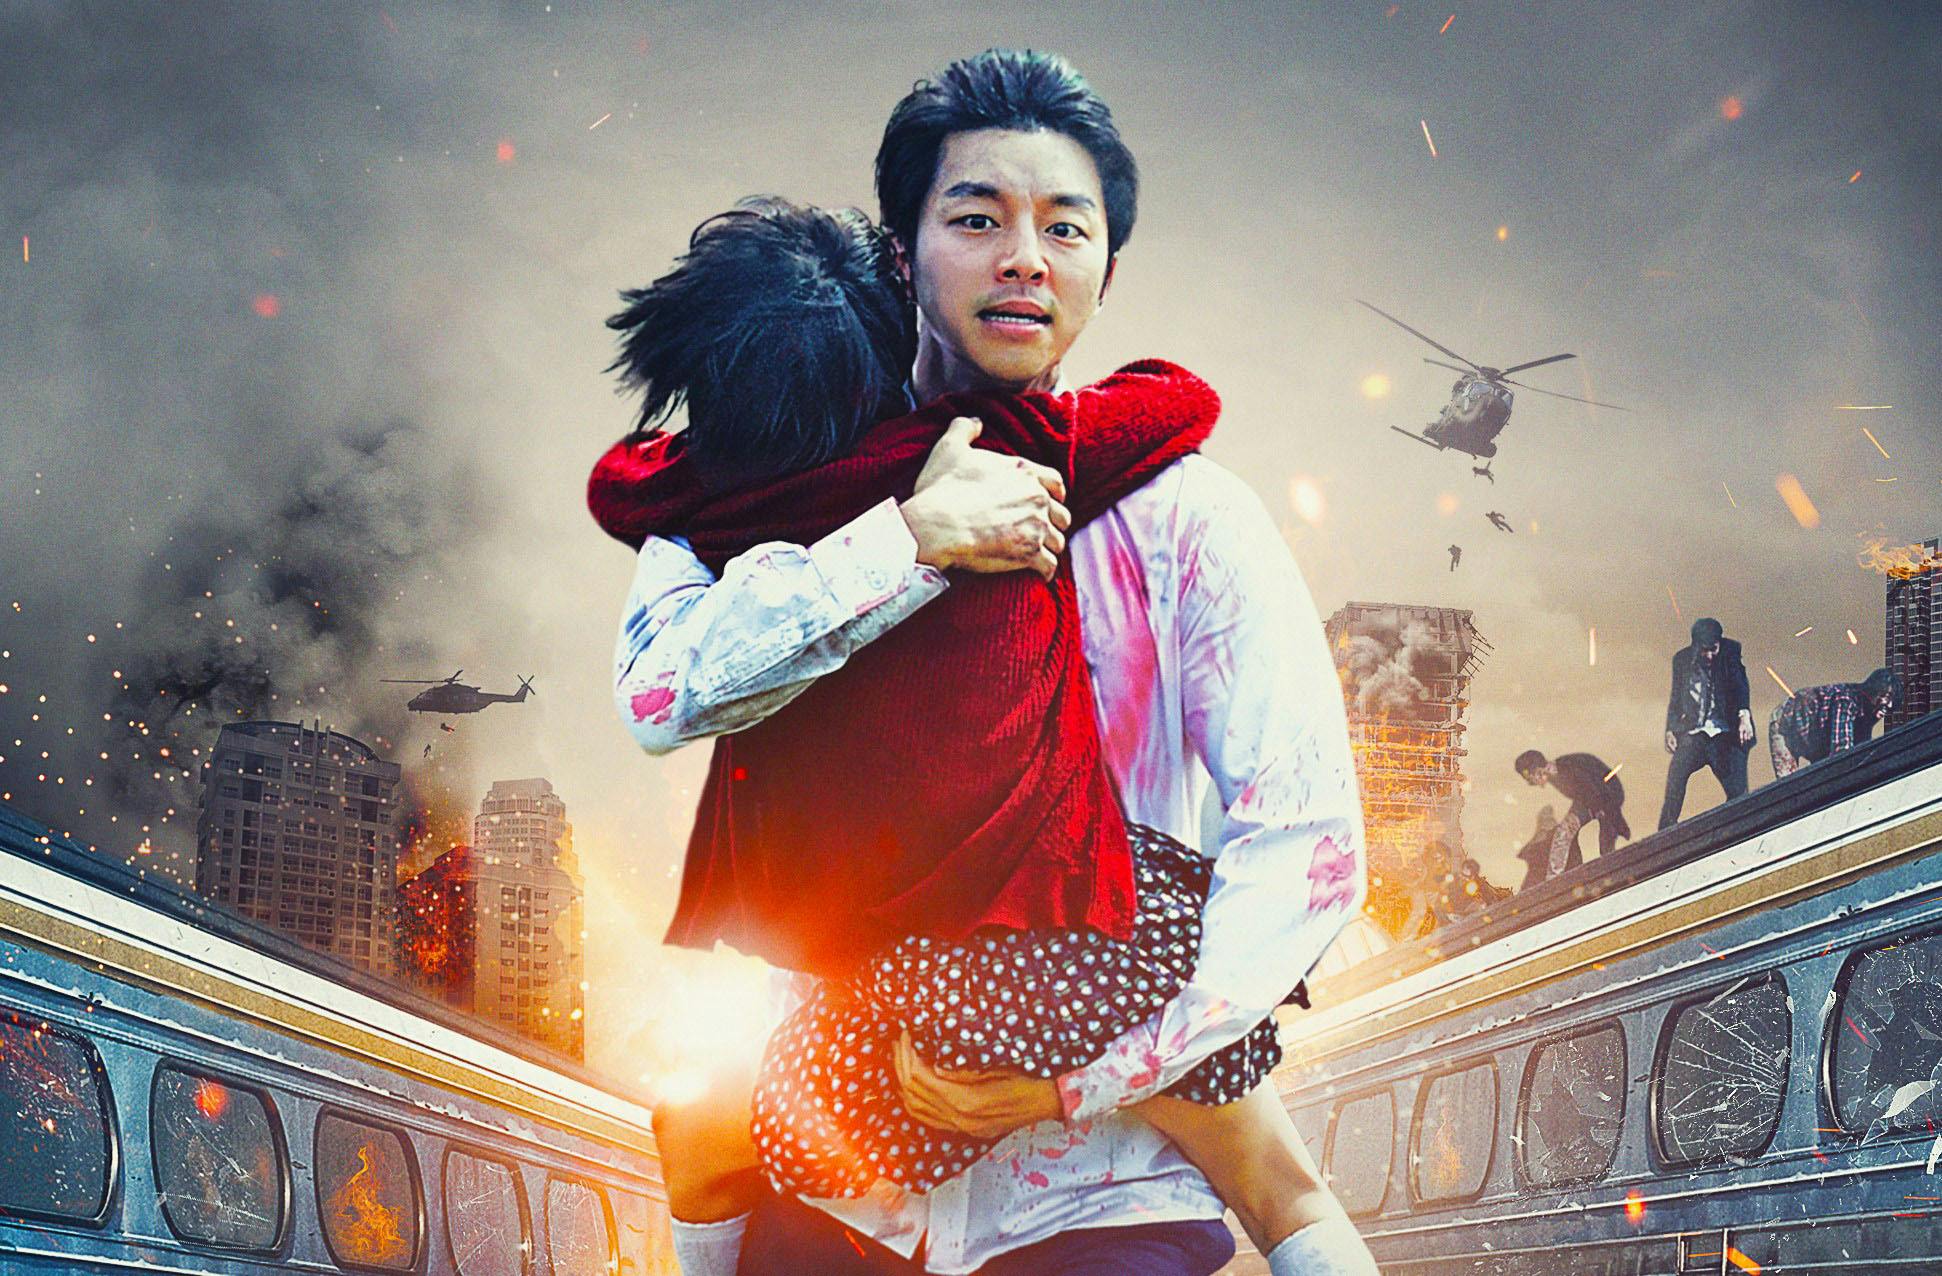 Home video review: Take thrilling 'Train to Busan' with S. Korean zombies